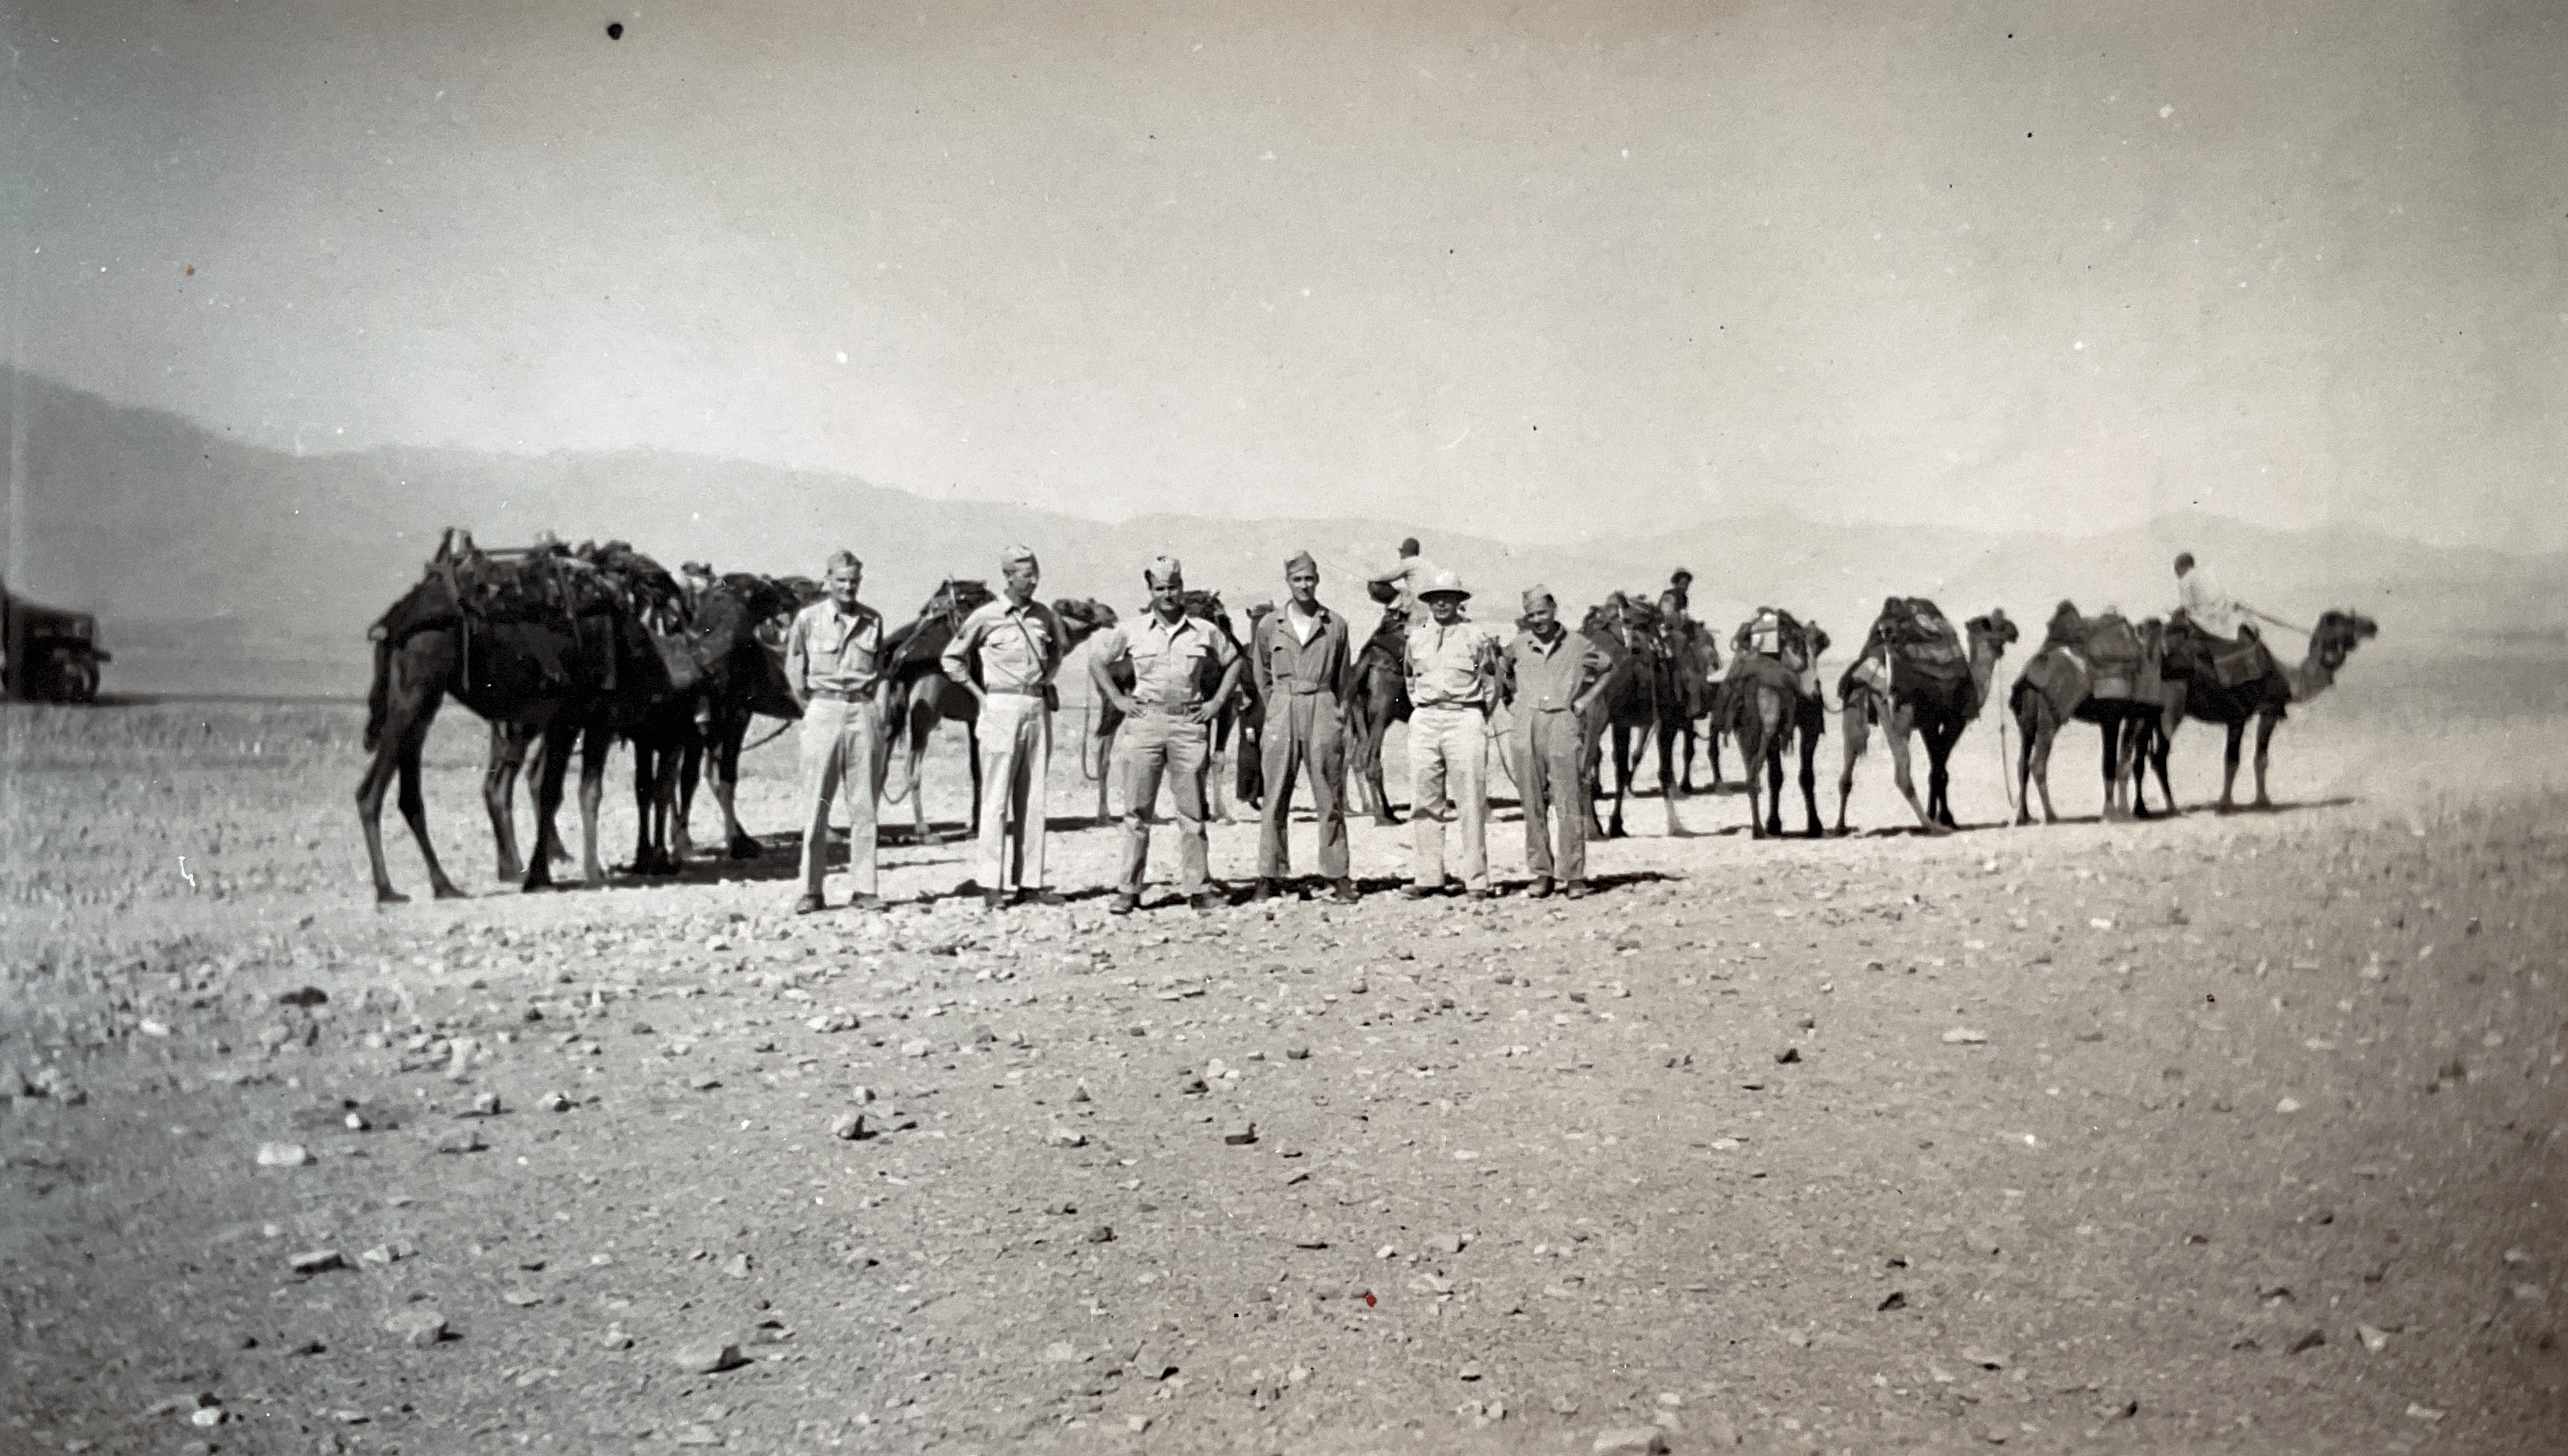 “I am on the extreme right. Taken on a mountain trip one Sunday P.M.” Persia 1943. Camel Caravan.